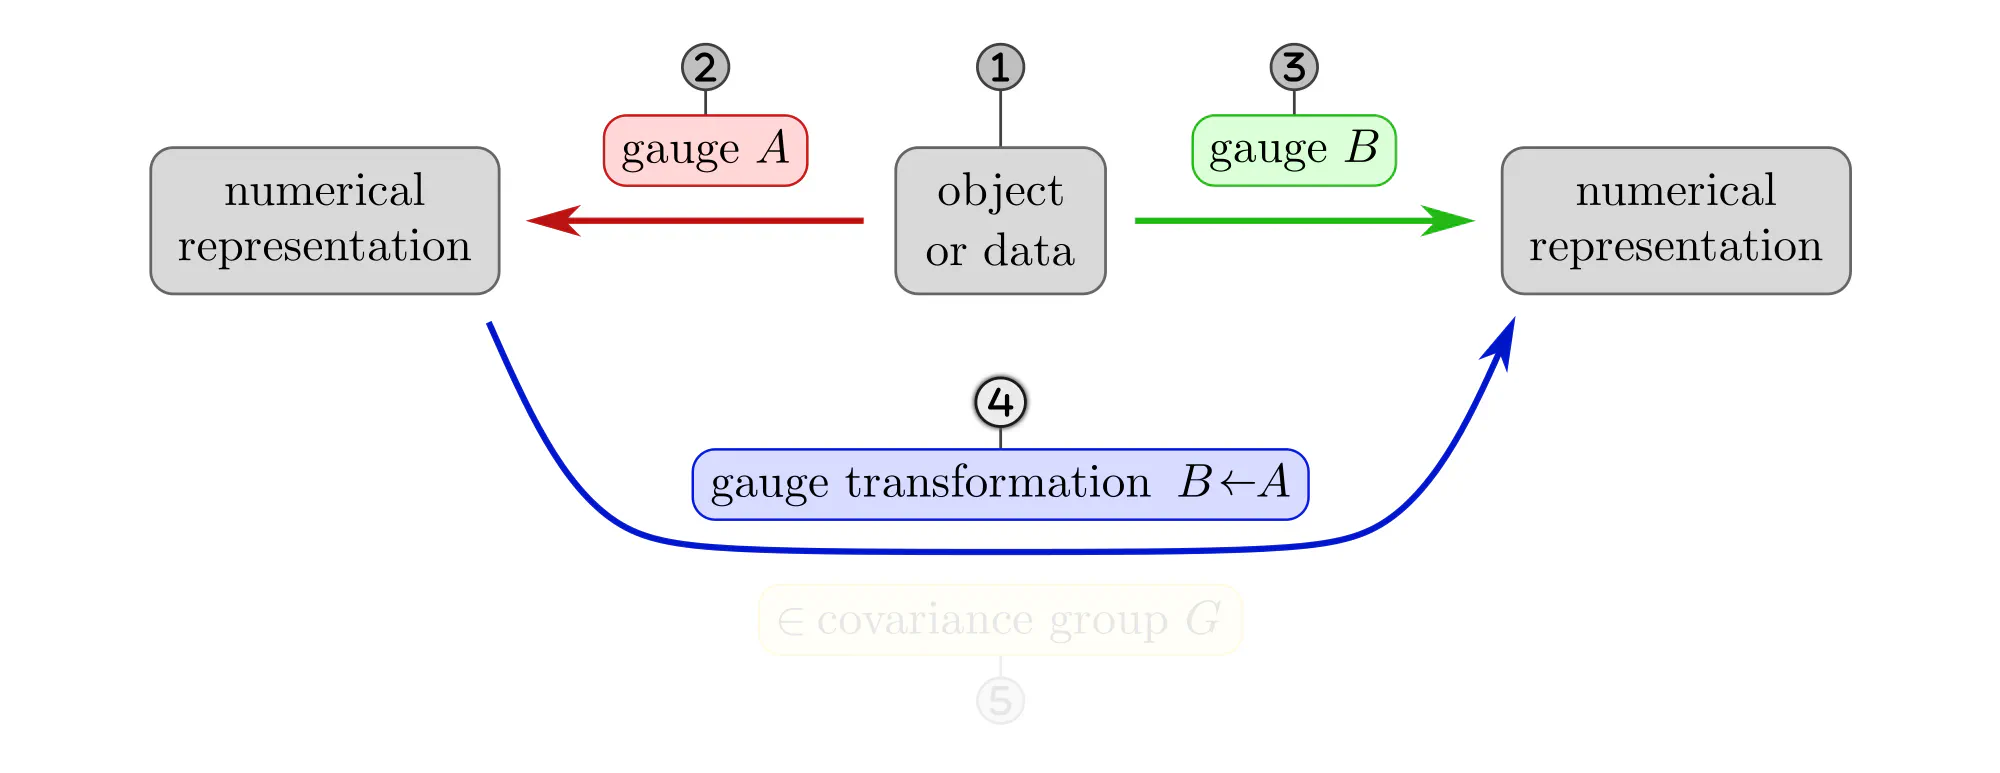 General idea of gauges and gauge transformations